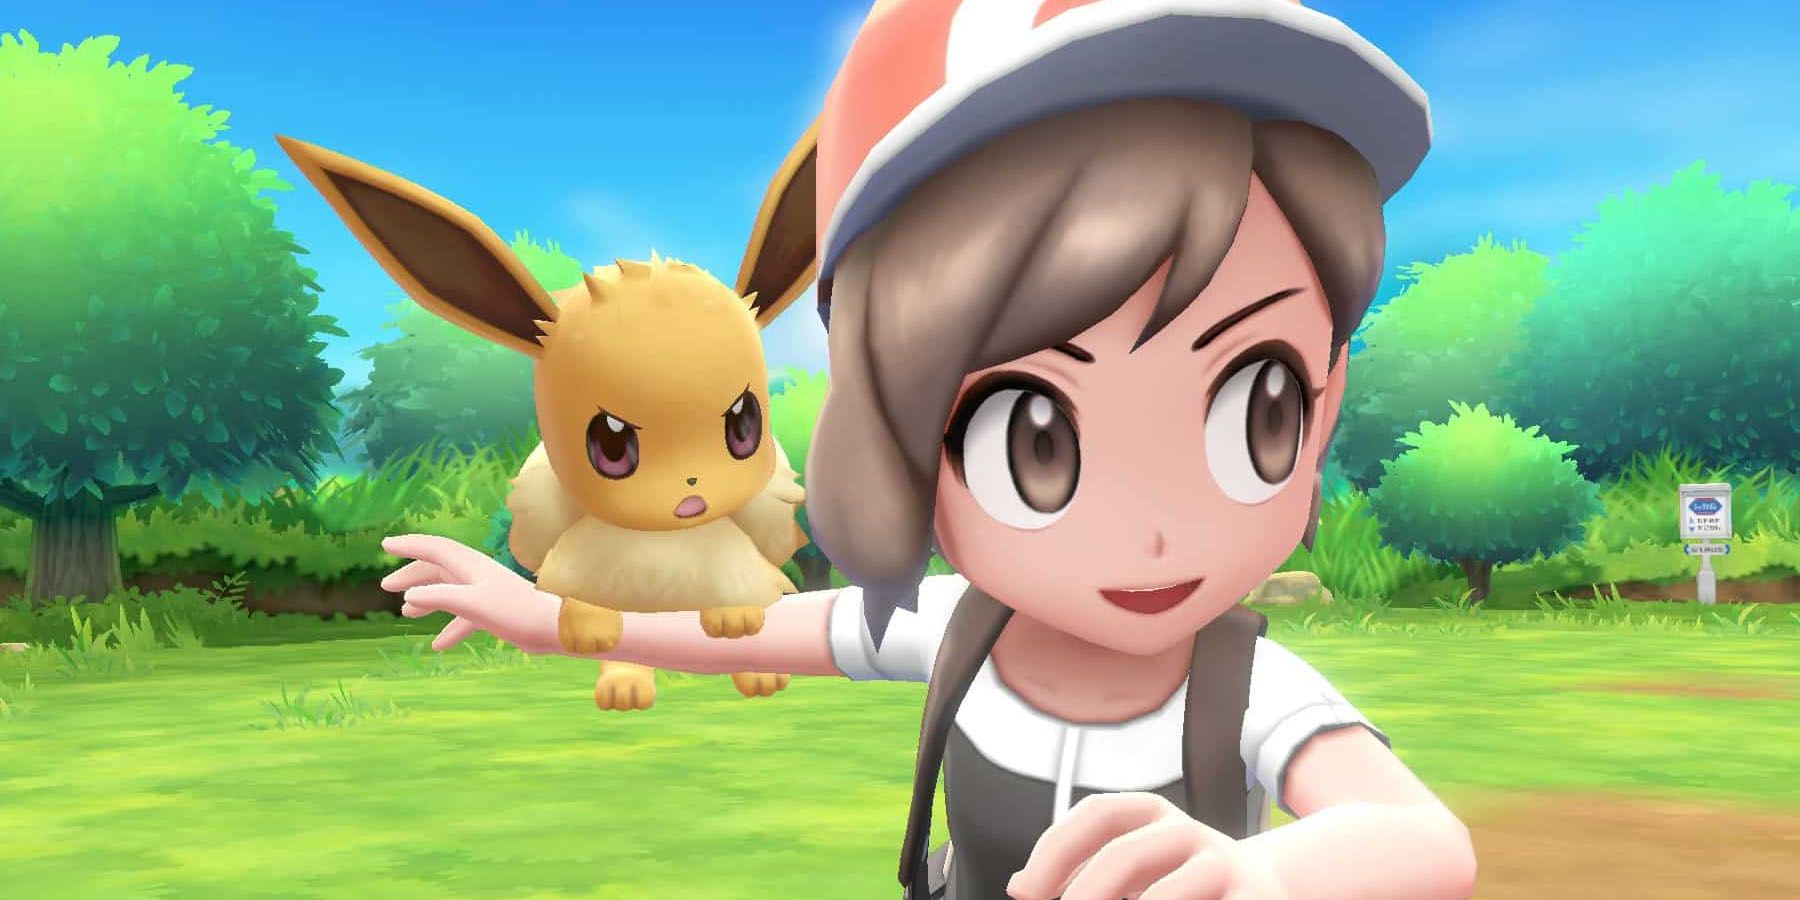 A screenshot of and Eevee standing on the arm of its trainer in Pokemon: Let's Go Eevee.